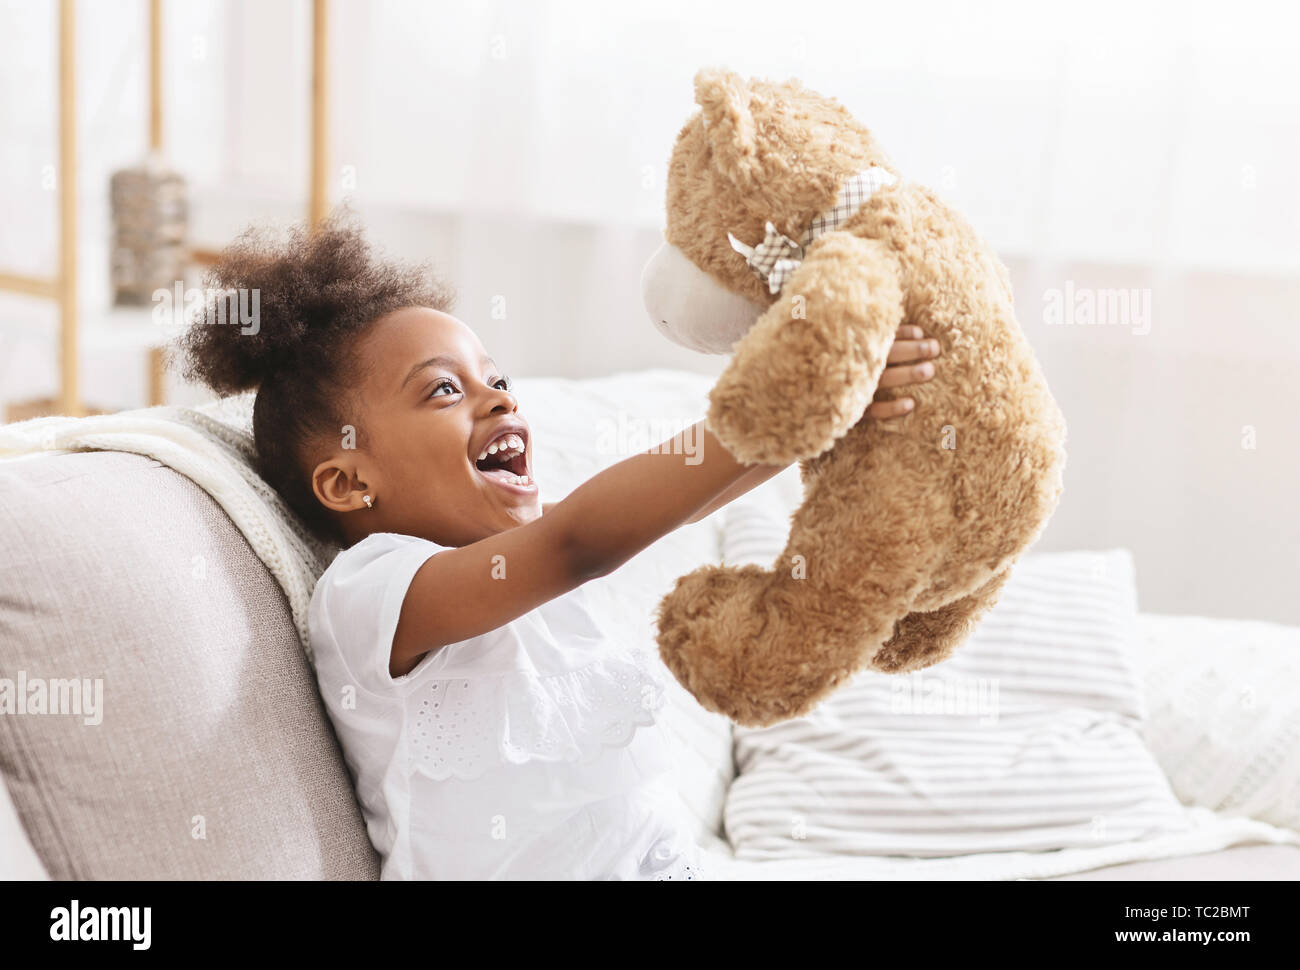 Cute african american child hugging teddy bear and smiling Banque D'Images